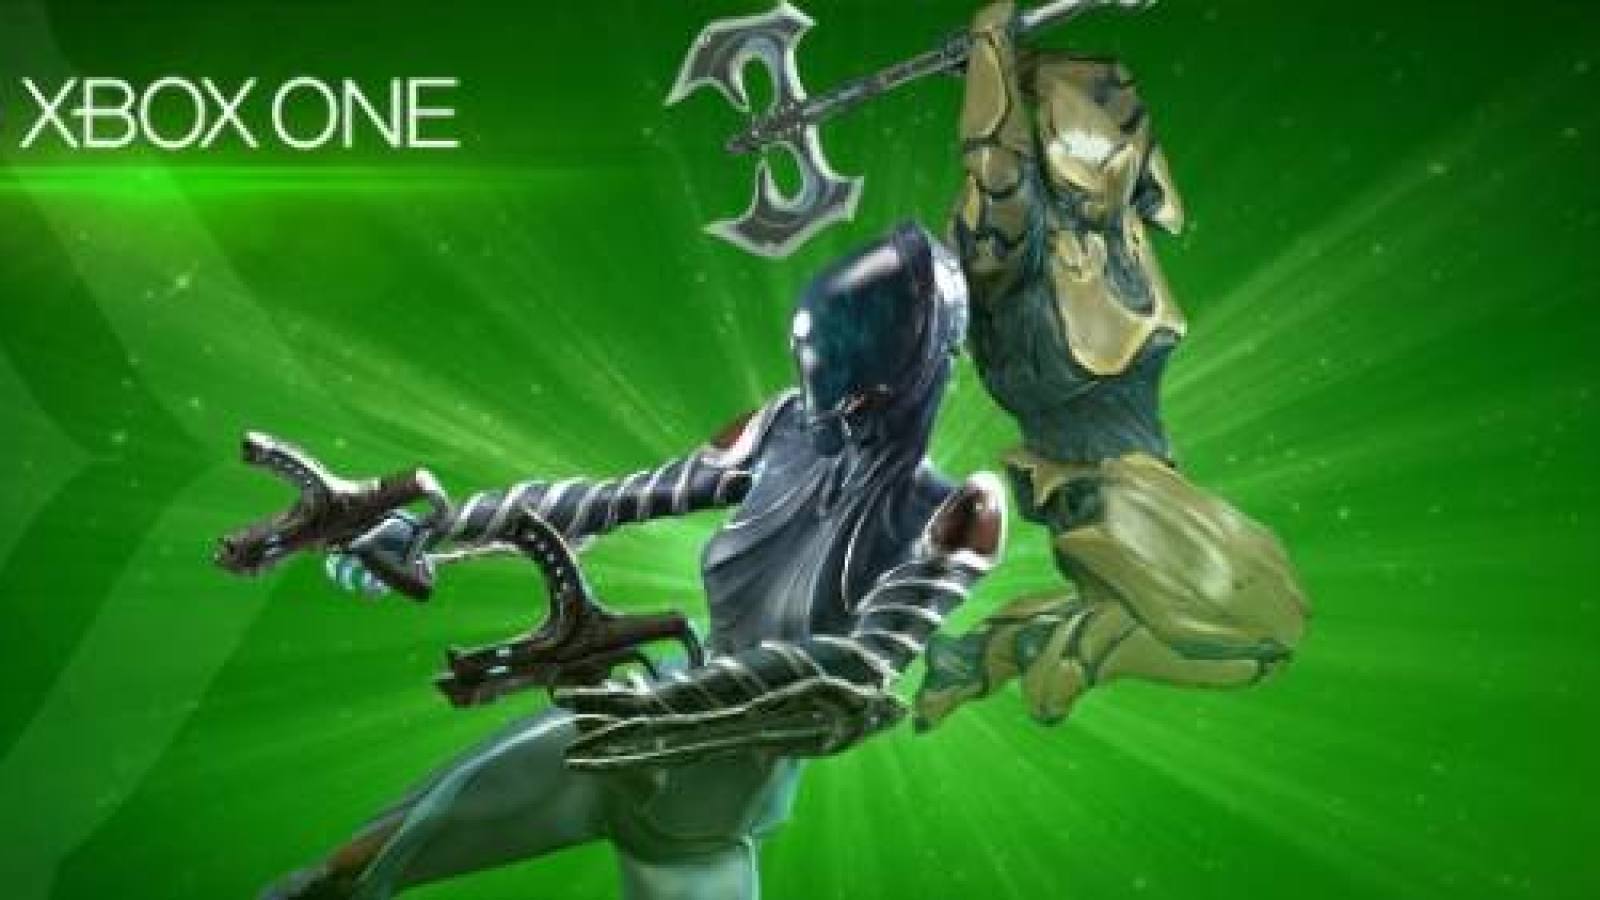 WELCOME XBOX ONE TENNO! 